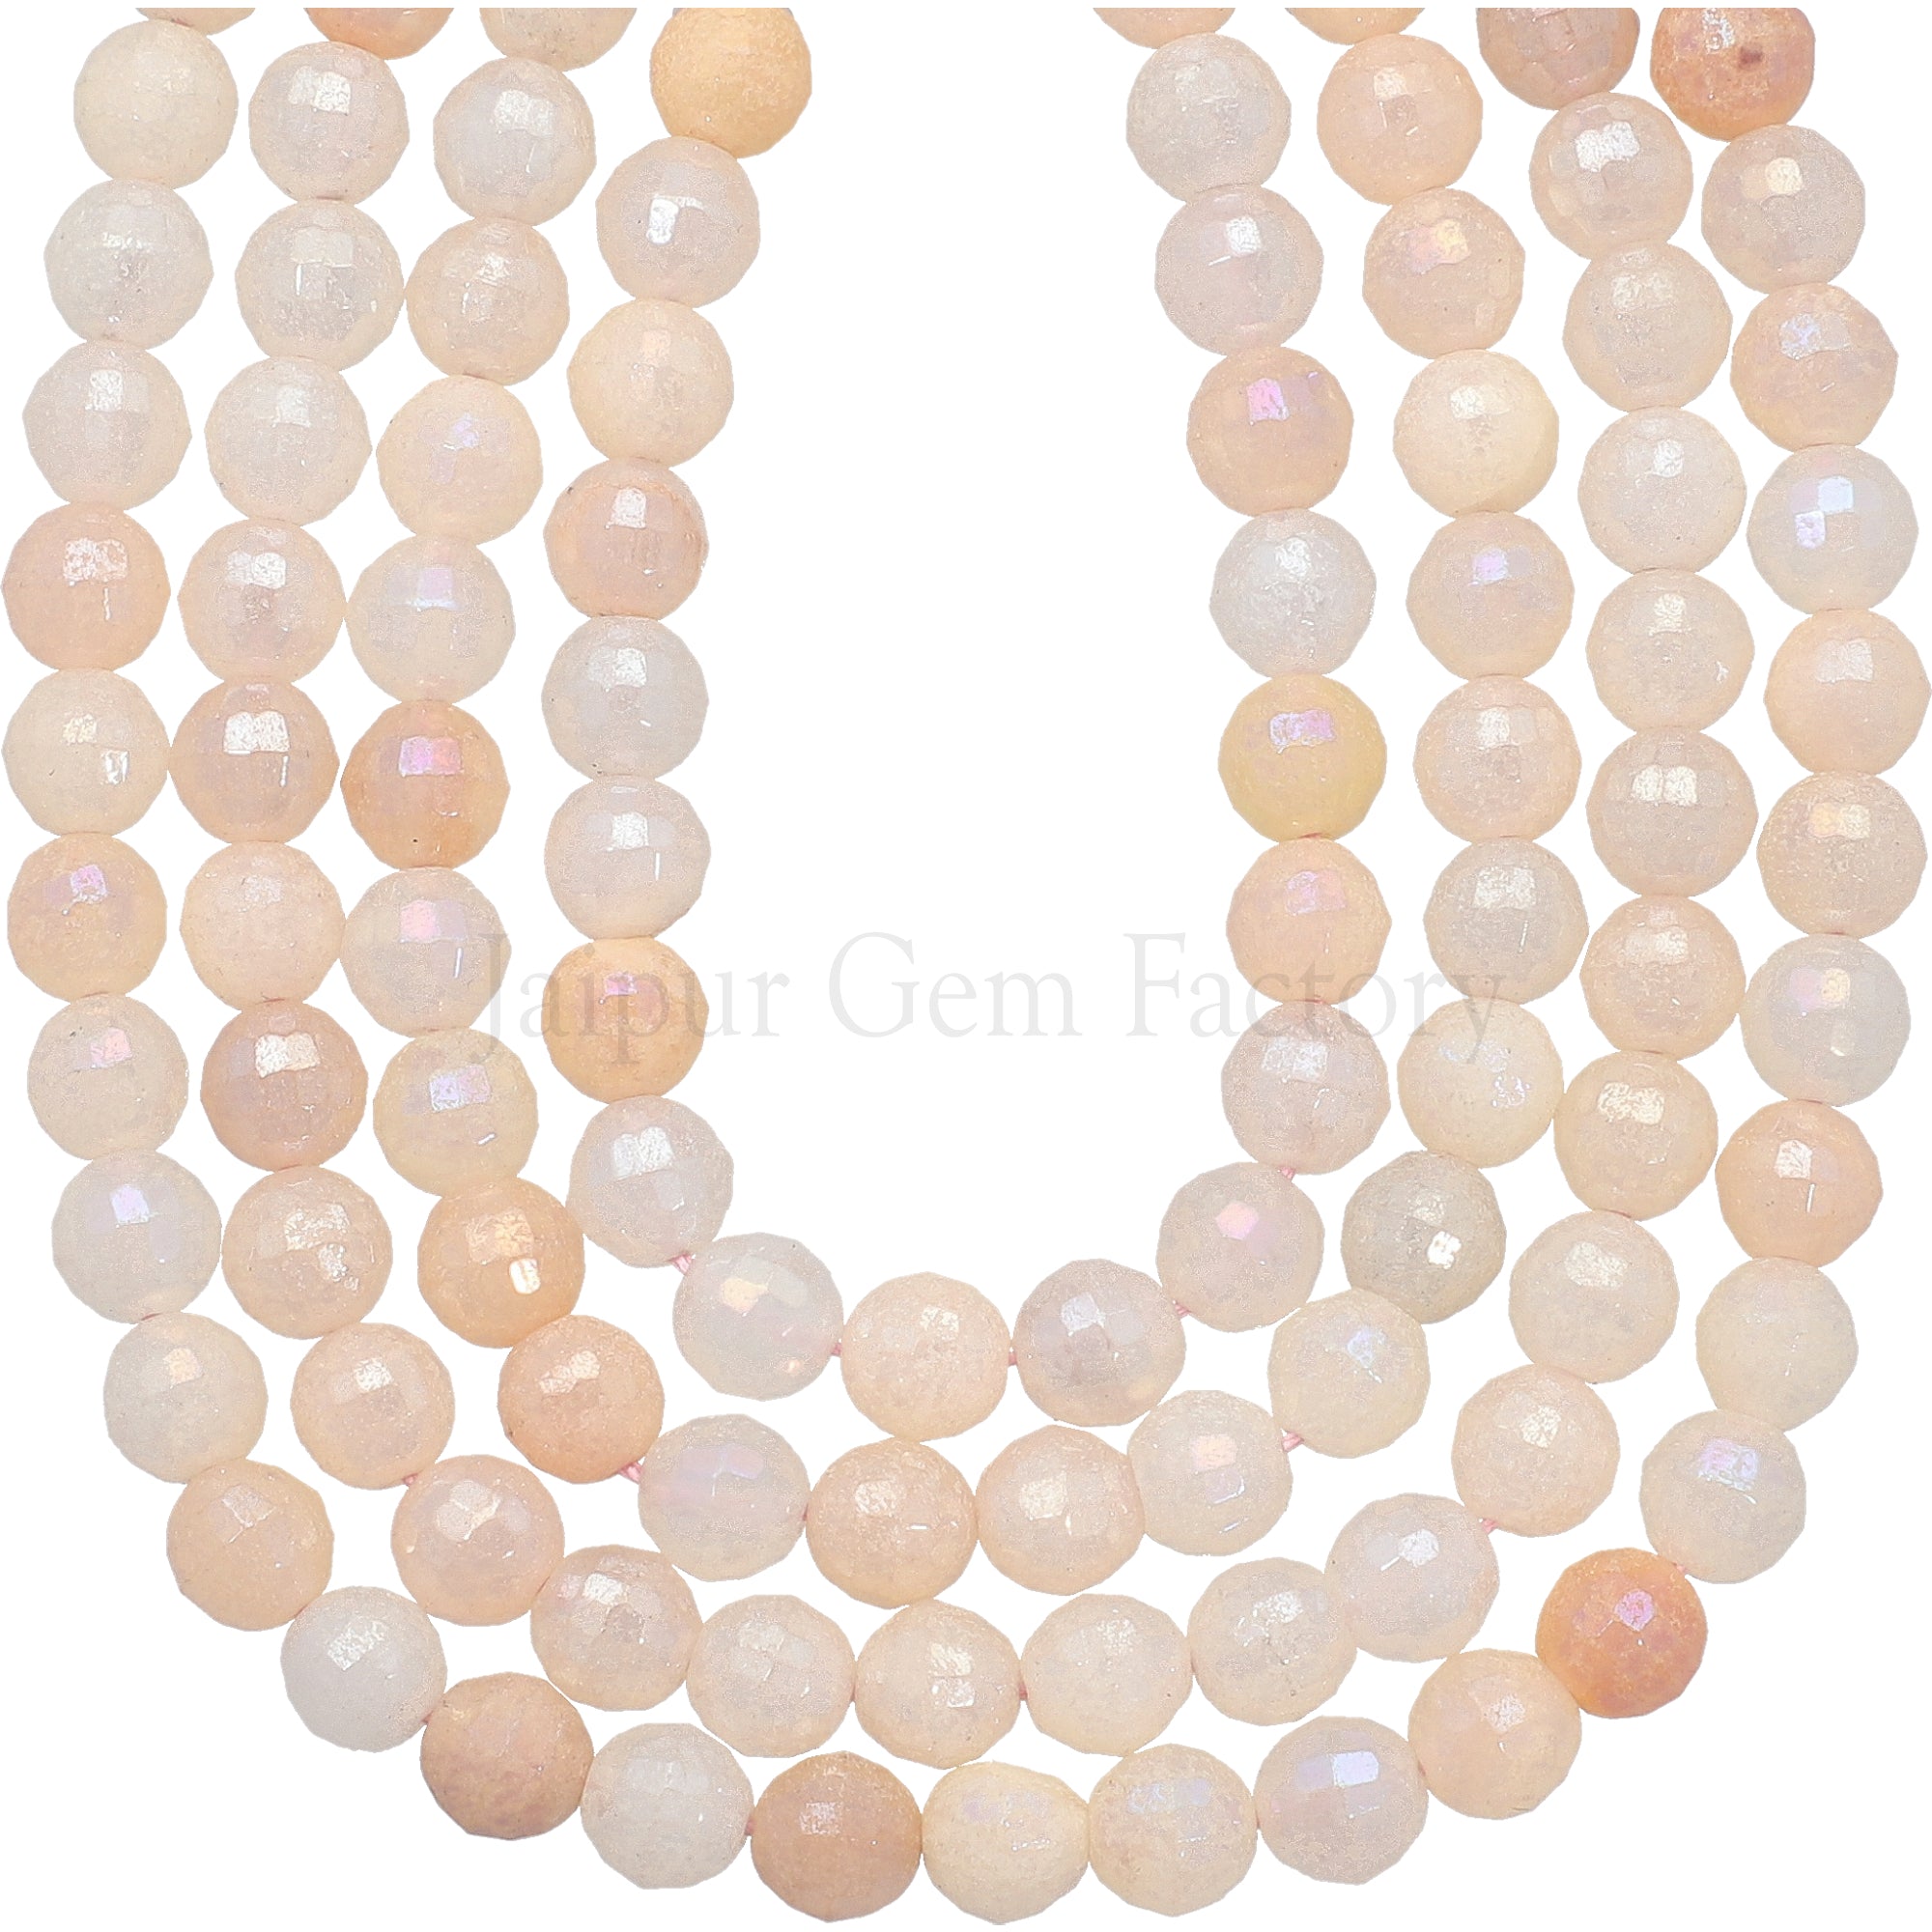 8 MM Pink Aventurine Faceted Round Beads 15 Inches Strand